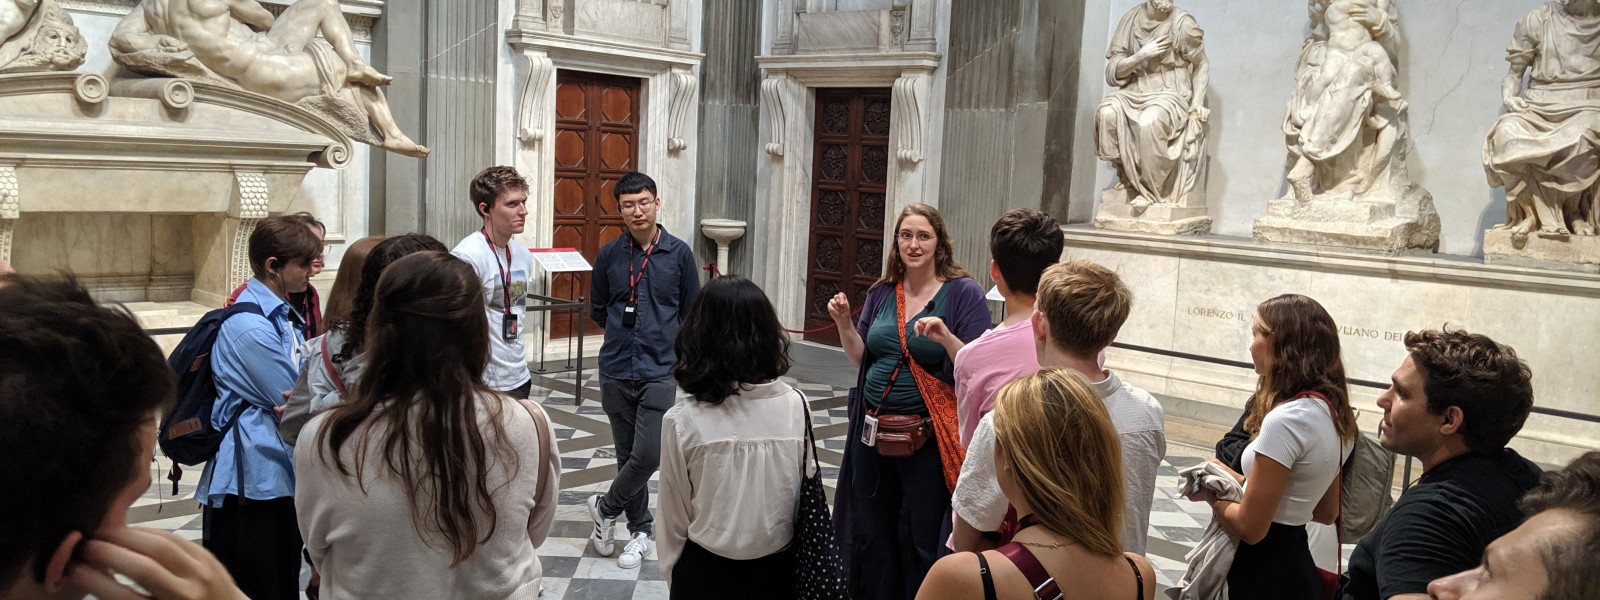 Prof. Palmer lectures to students in the Basilica di San Lorenzo.